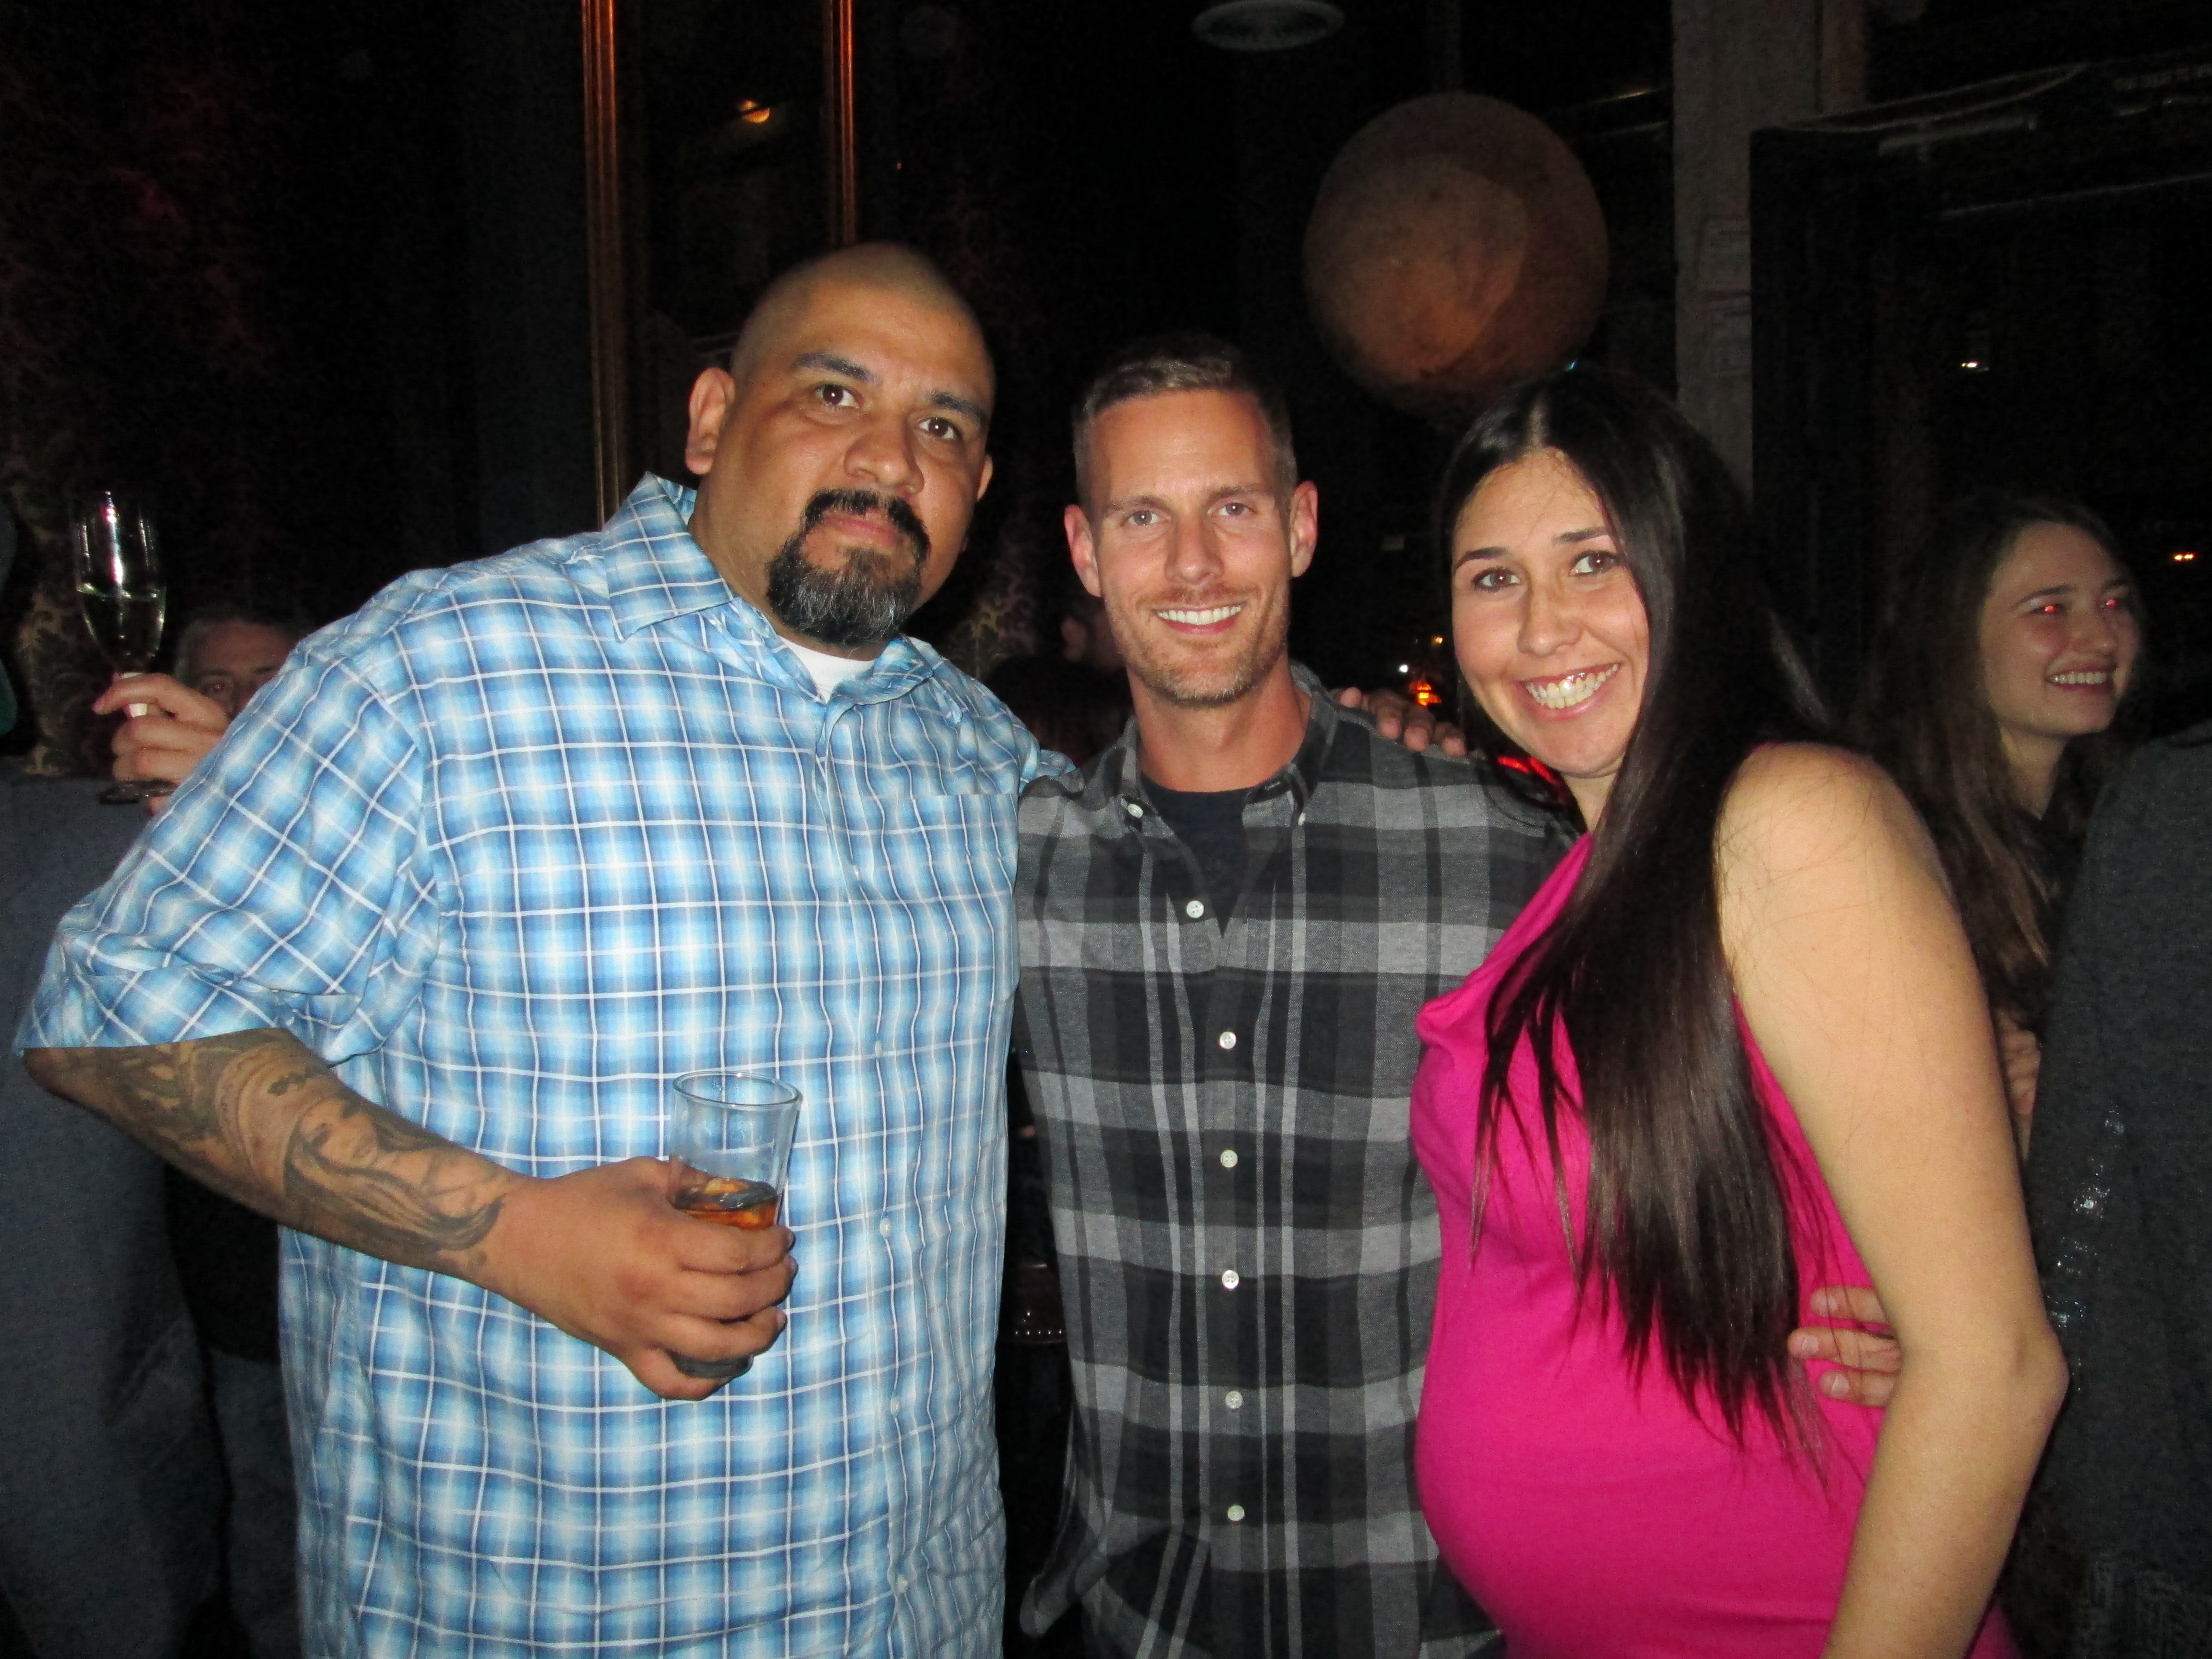 Paranormal Activity Wrap Party with Writer/Director Christopher Landon